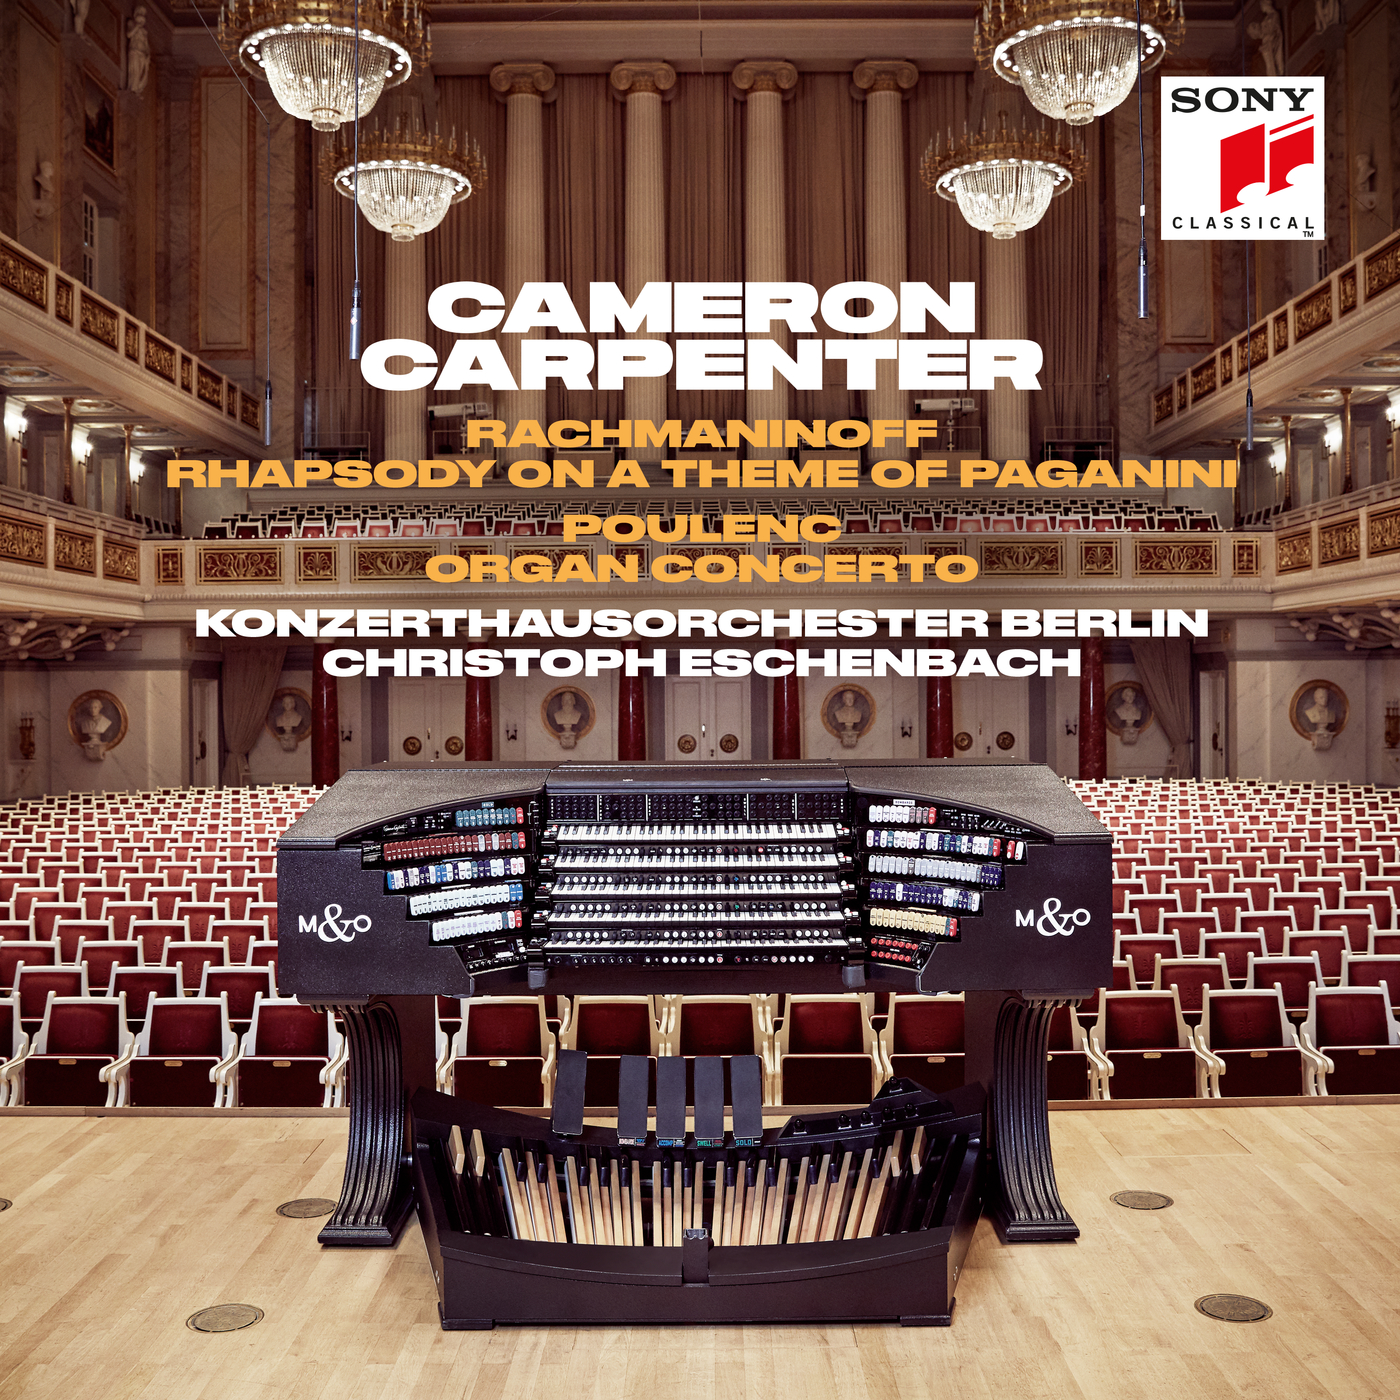 Rhapsody on a Theme of Paganini, Op. 43: Variation XVIII - Andante cantabile